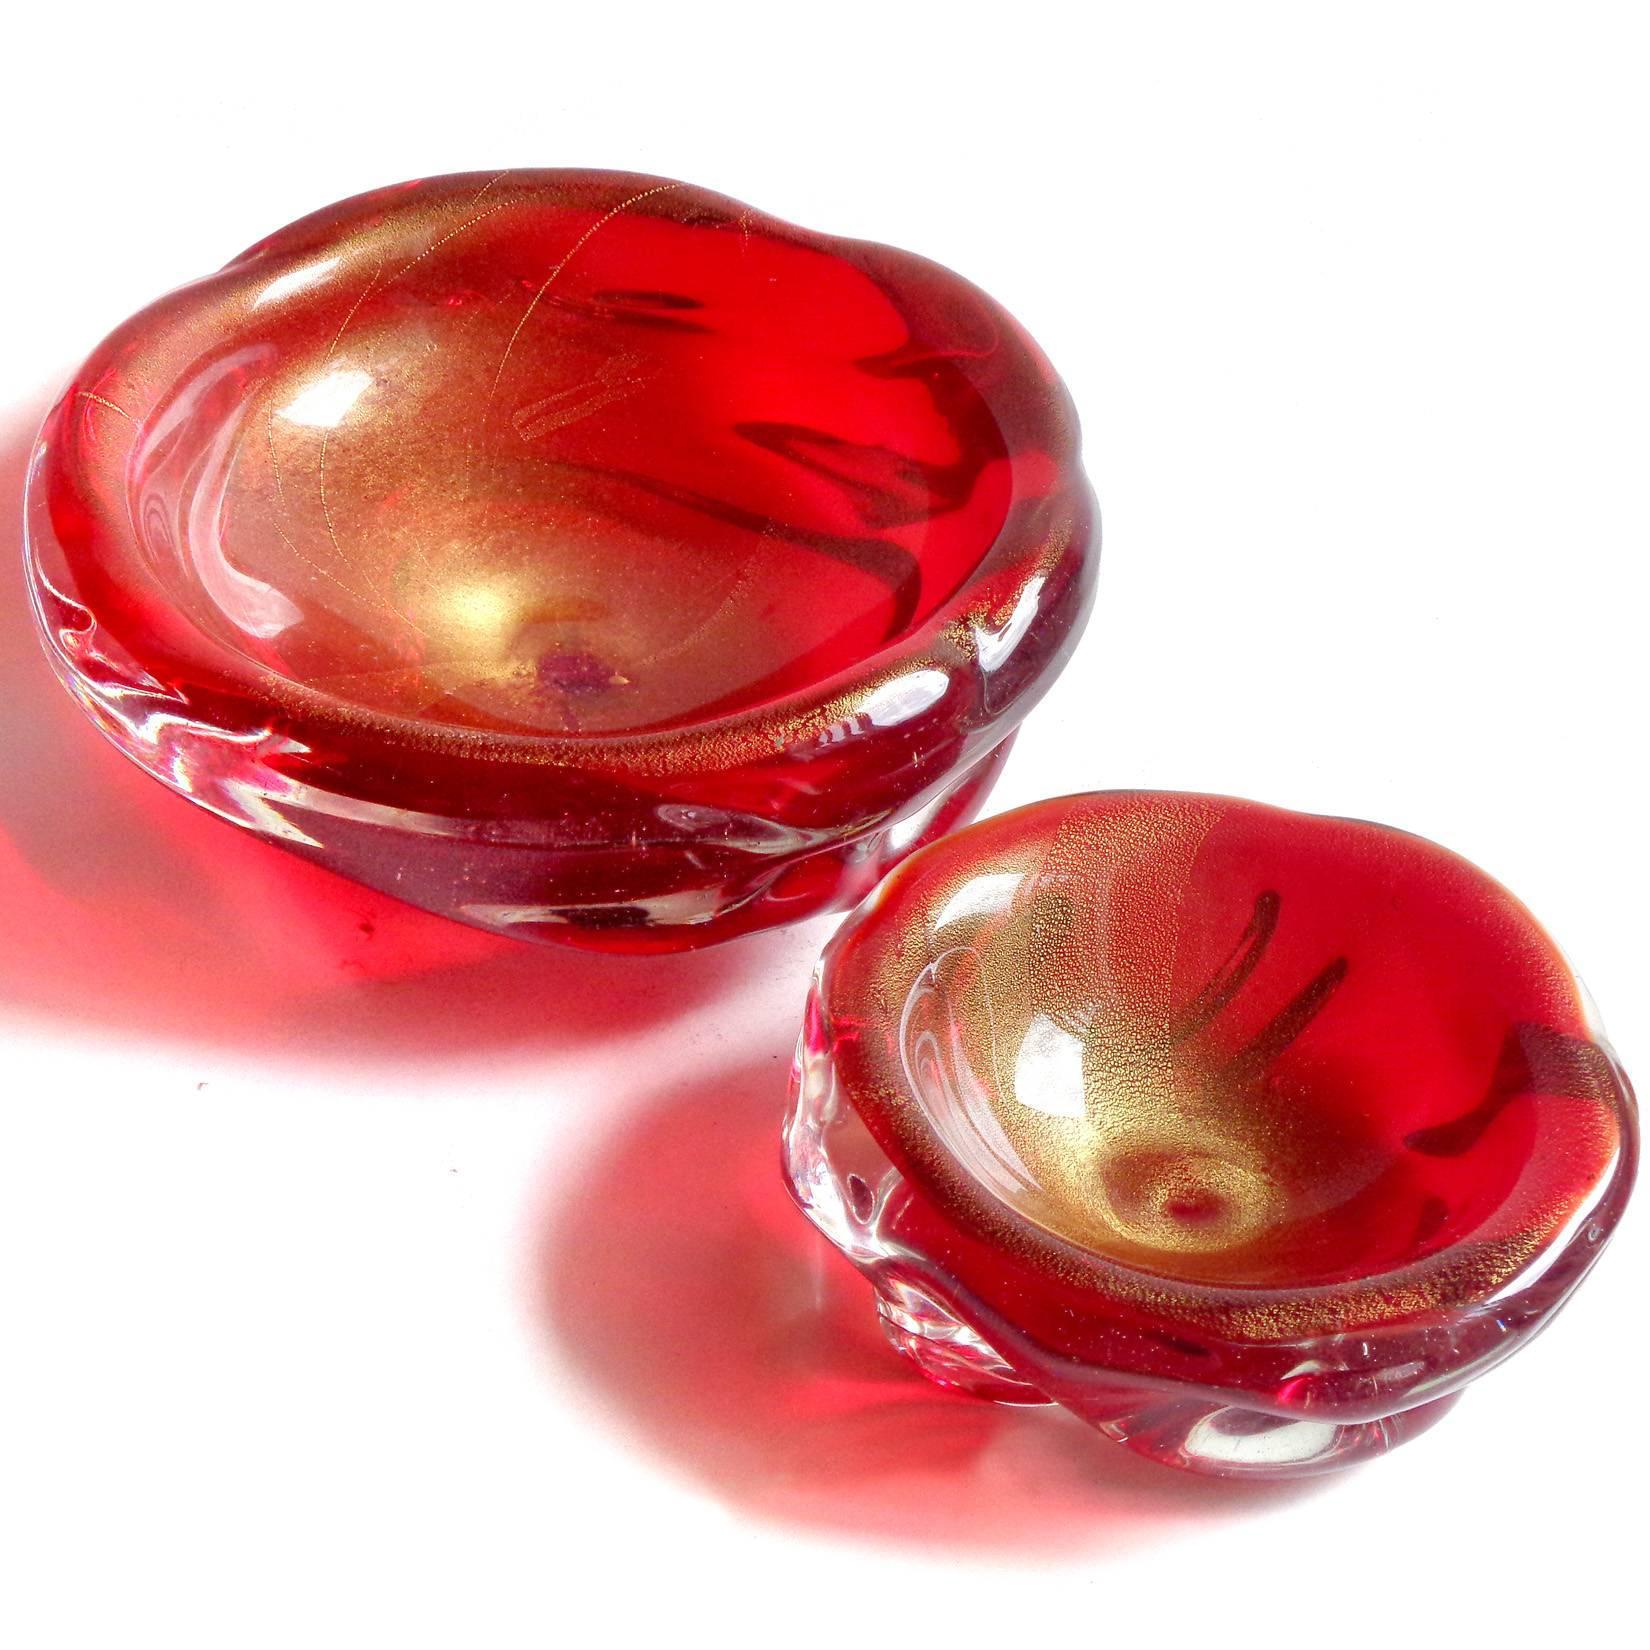 Beautiful set of vintage Murano hand blown red and gold flecks Italian art glass bowls. Attributed to designers Archimede Seguso and Flavio Poli. The smaller bowl has a partial 